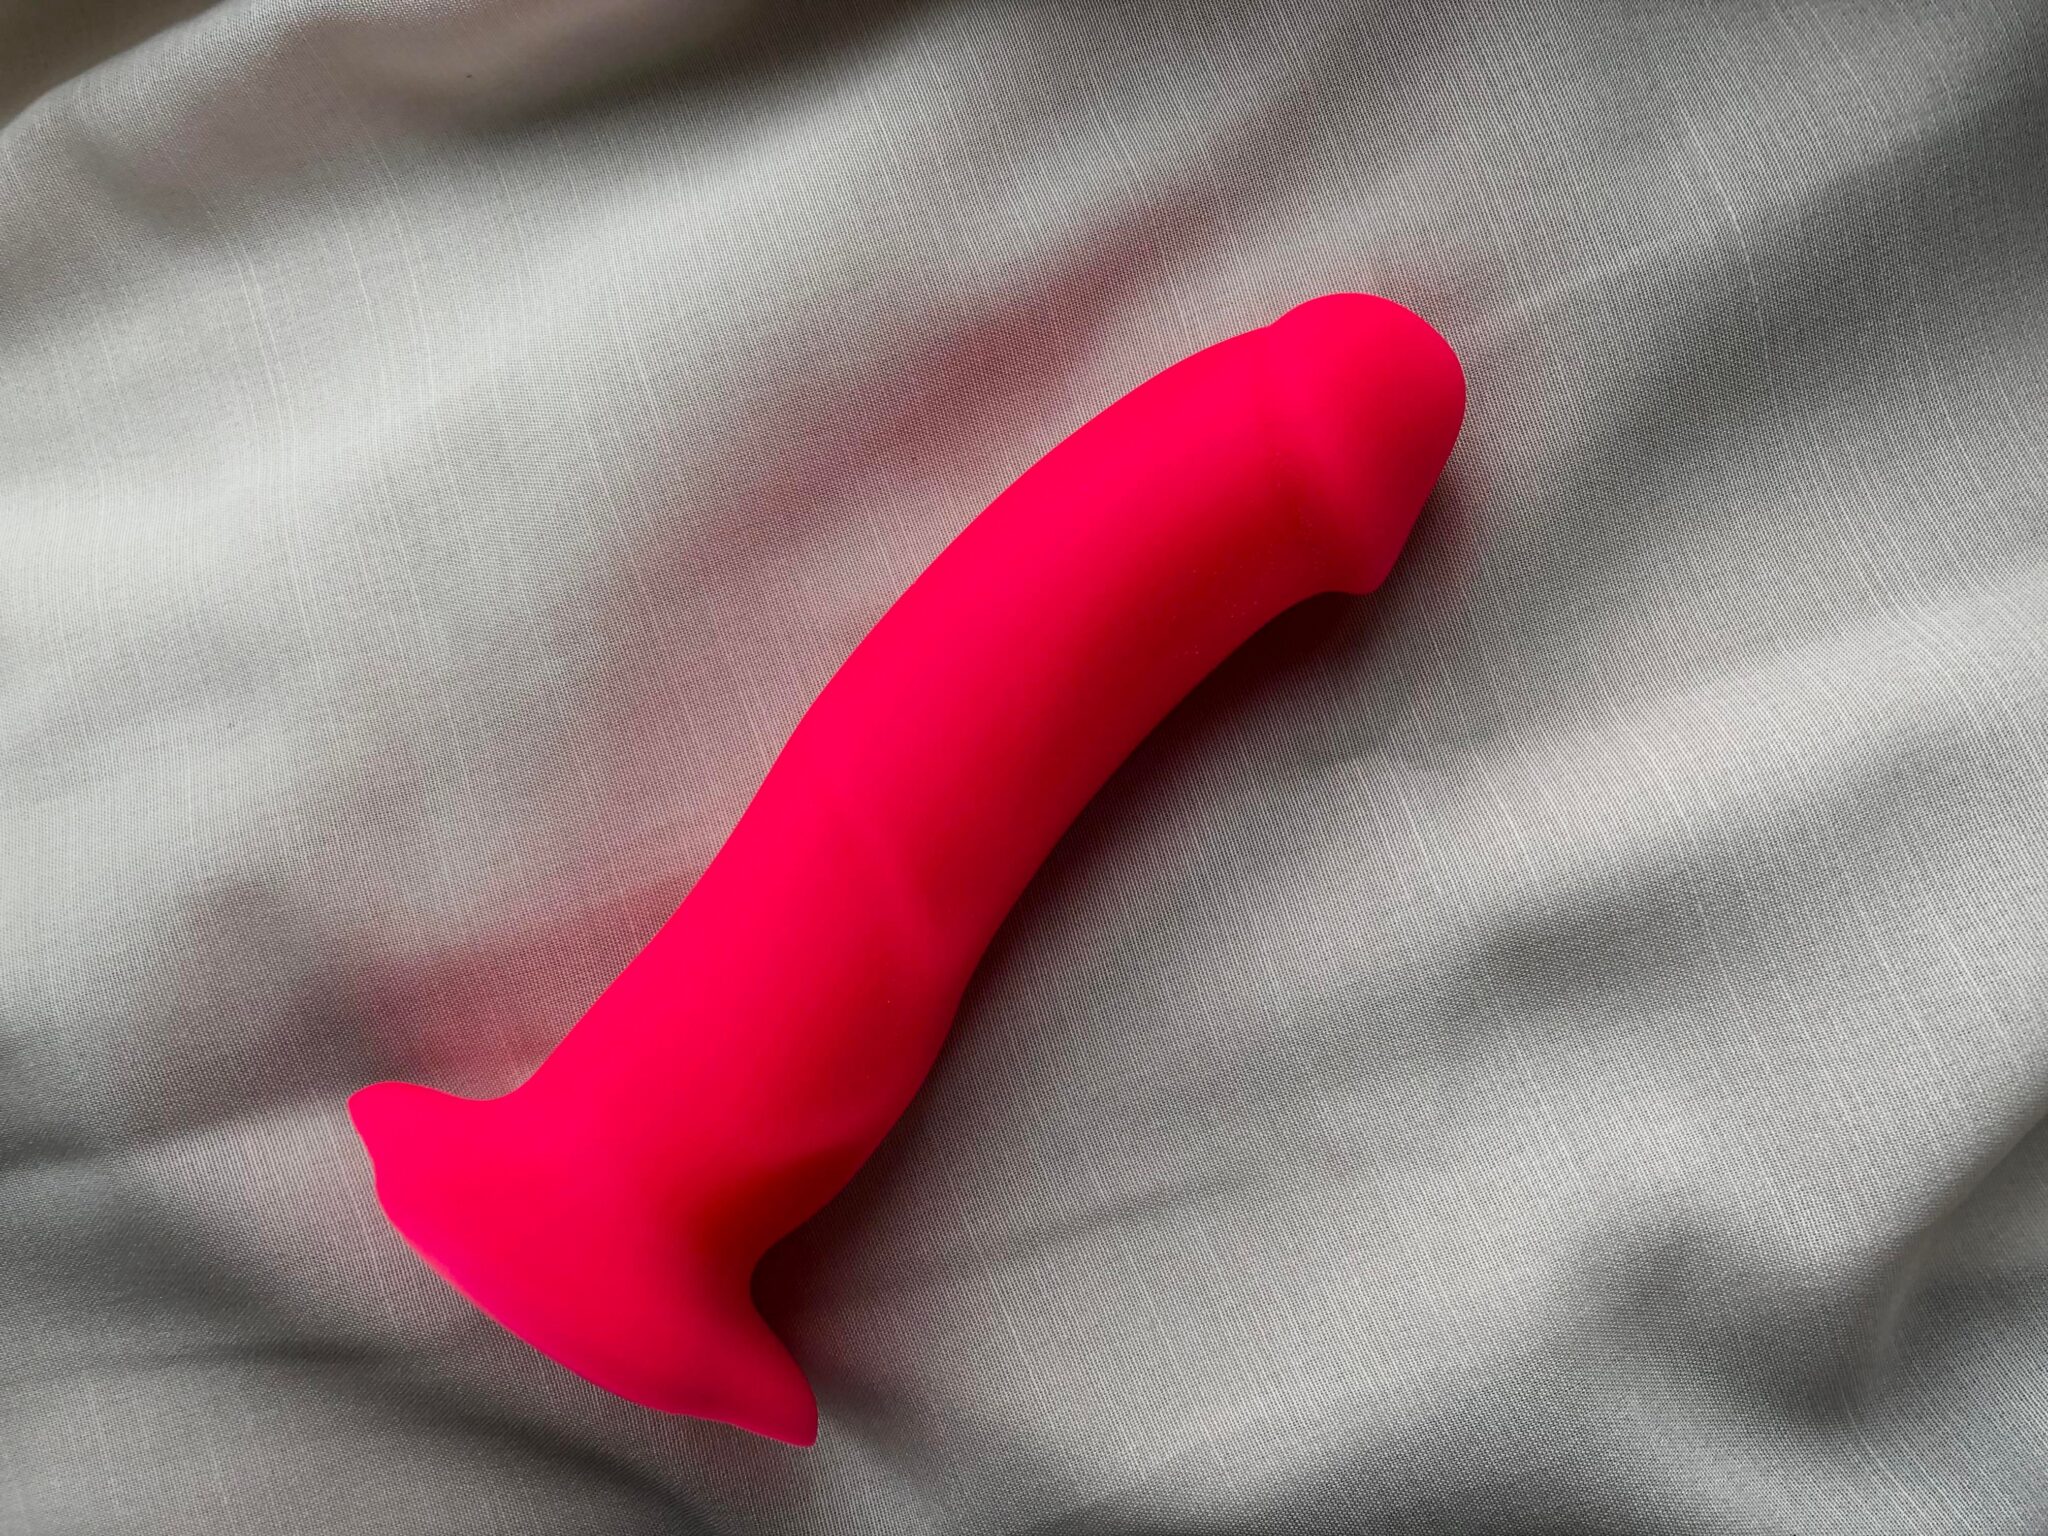 Fun Factory The Boss Pink Silicone Dildo. Slide 6